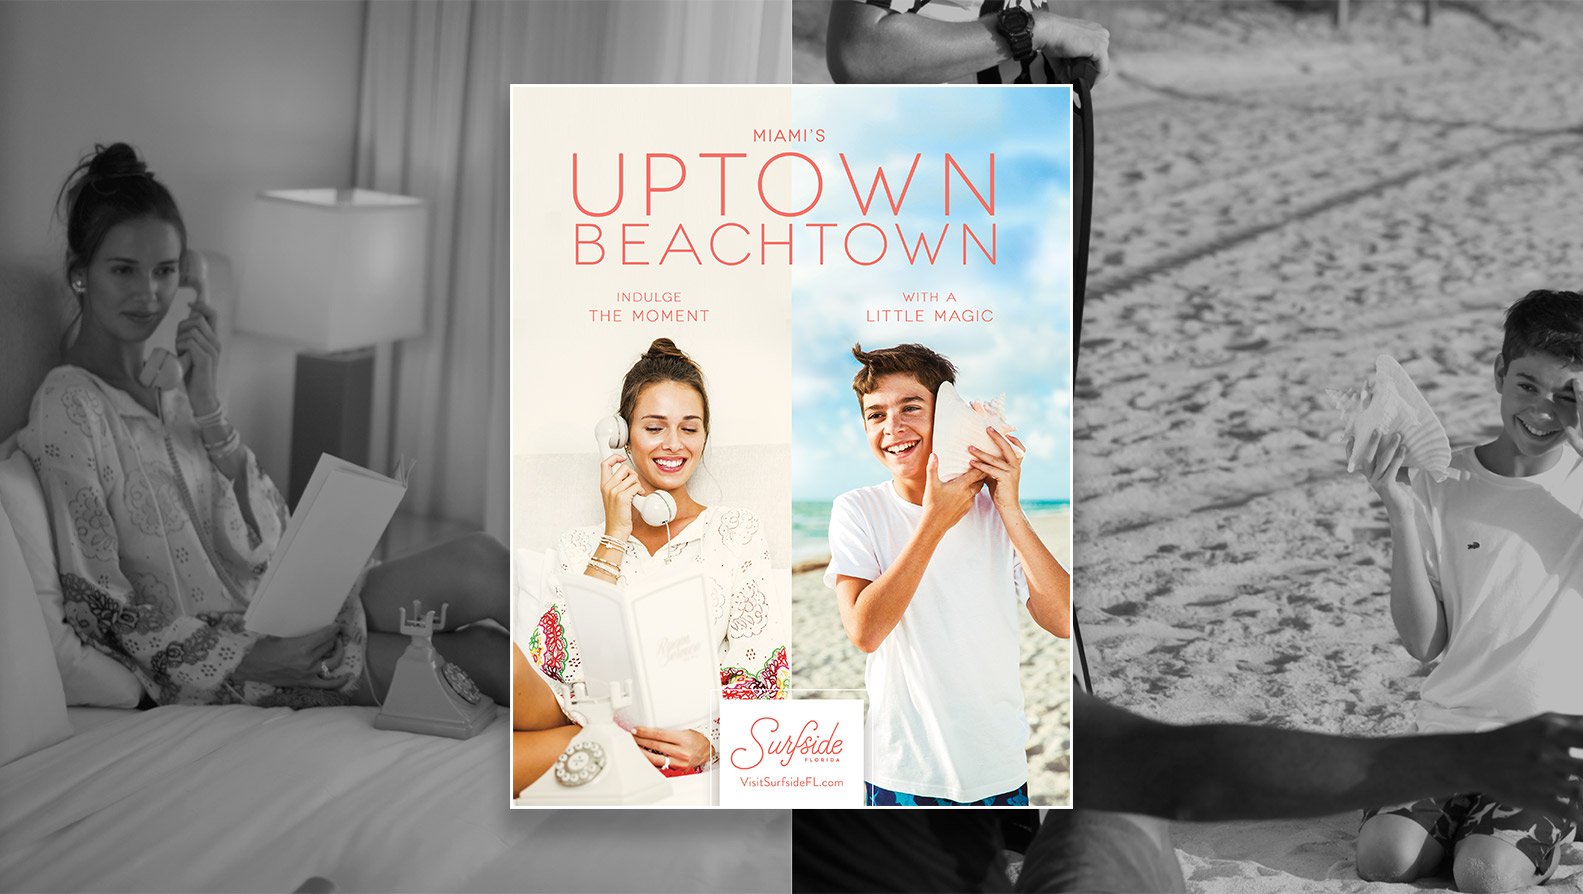 Jacober Creative Identity and Campaign for the Town of Surfside Florida - Photo of magazine ads for the Uptown Beachtown campaign. Left: Woman orders room service. Right: Boy listens through a conch shell